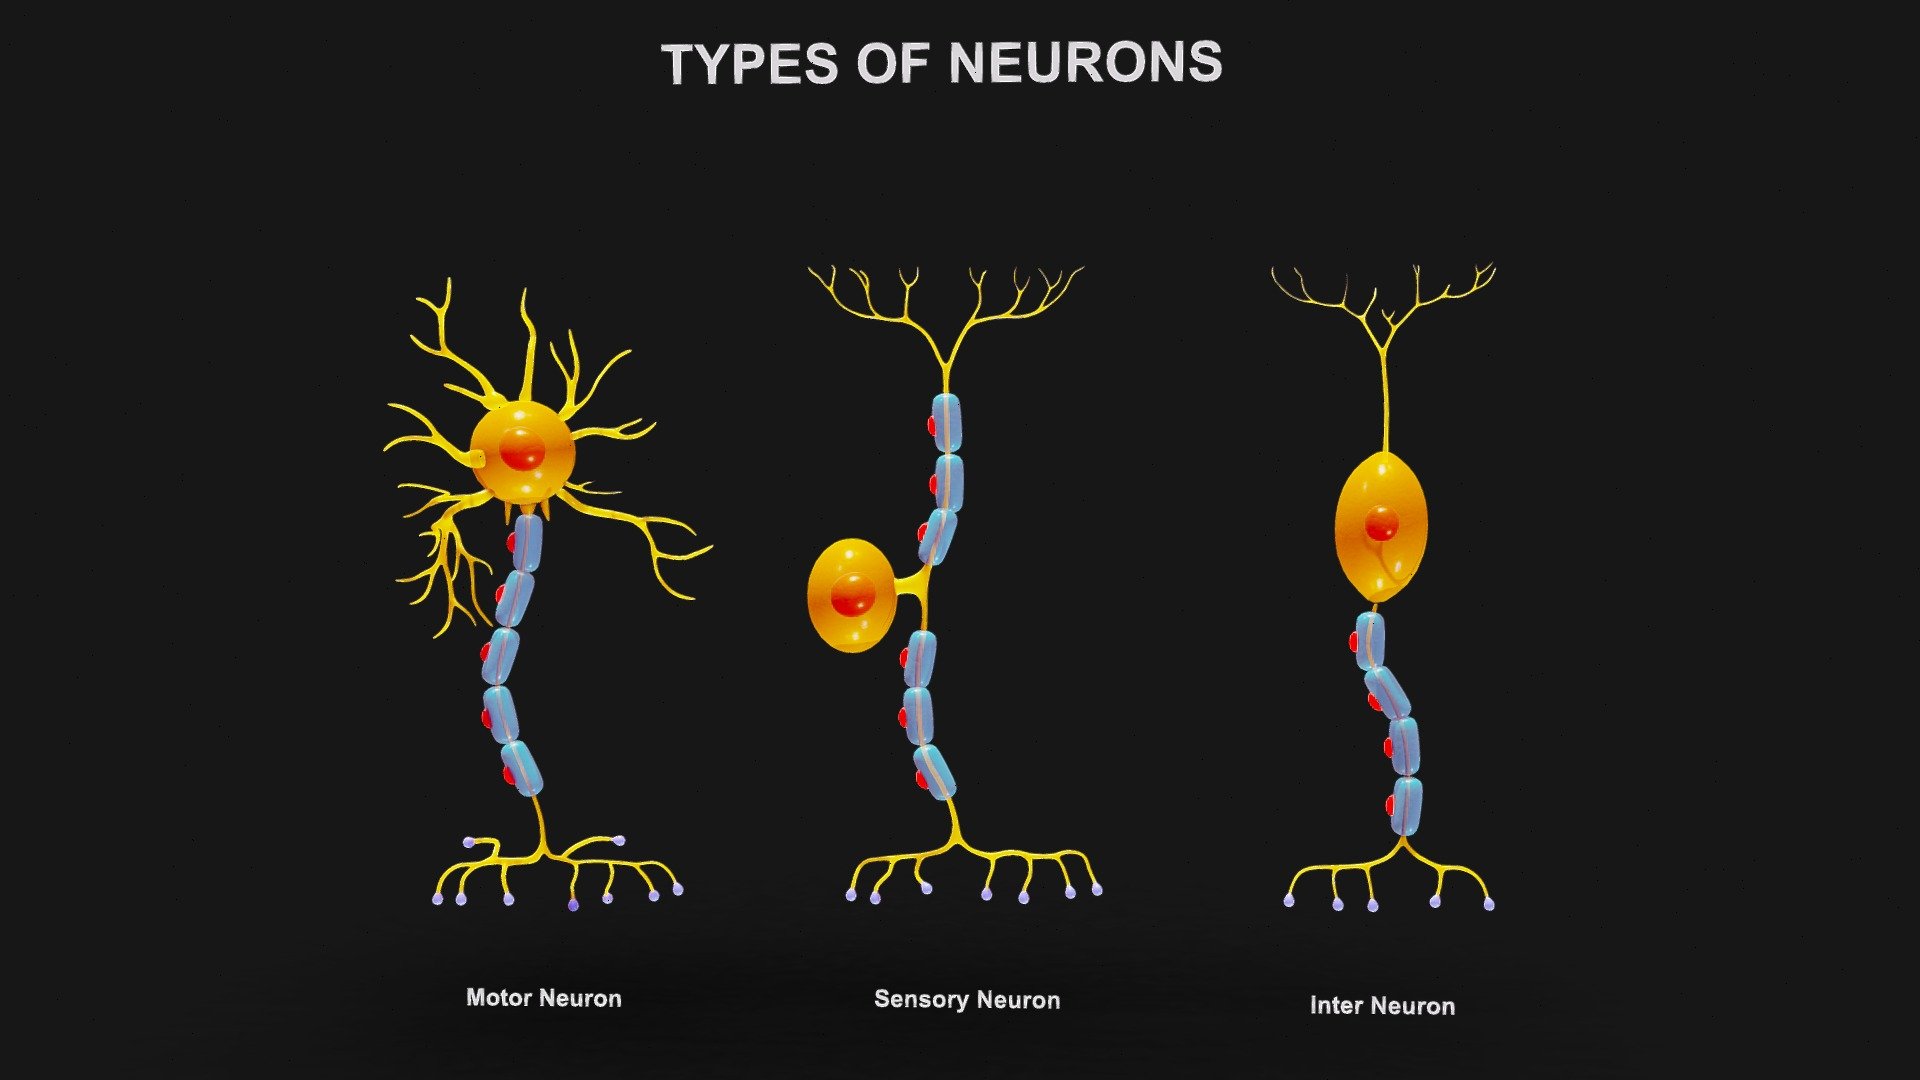 Types of Neurons

Motor neurons transmit signals from the central nervous system to muscles and glands, allowing for movement and control. Sensory neurons, on the other hand, receive information from sensory receptors and convey it to the central nervous system, enabling the perception of the environment. Interneurons act as connectors between motor and sensory neurons, facilitating communication and processing of information within the nervous system.




Format: FBX, OBJ, MTL, STL, glb, glTF, Blender v3.6.2

Optimized UVs (Non-Overlapping UVs)

PBR Textures | 1024x1024 - 2048x2048 - 4096x4096 | (1K, 2K, 4K - Jpeg, Png)

Base Color (Albedo)

Normal Map

AO Map

Metallic Map

Roughness Map

Height Map

Opacity Map
 - Types of Neurons - Buy Royalty Free 3D model by Nima (@h3ydari96) 3d model